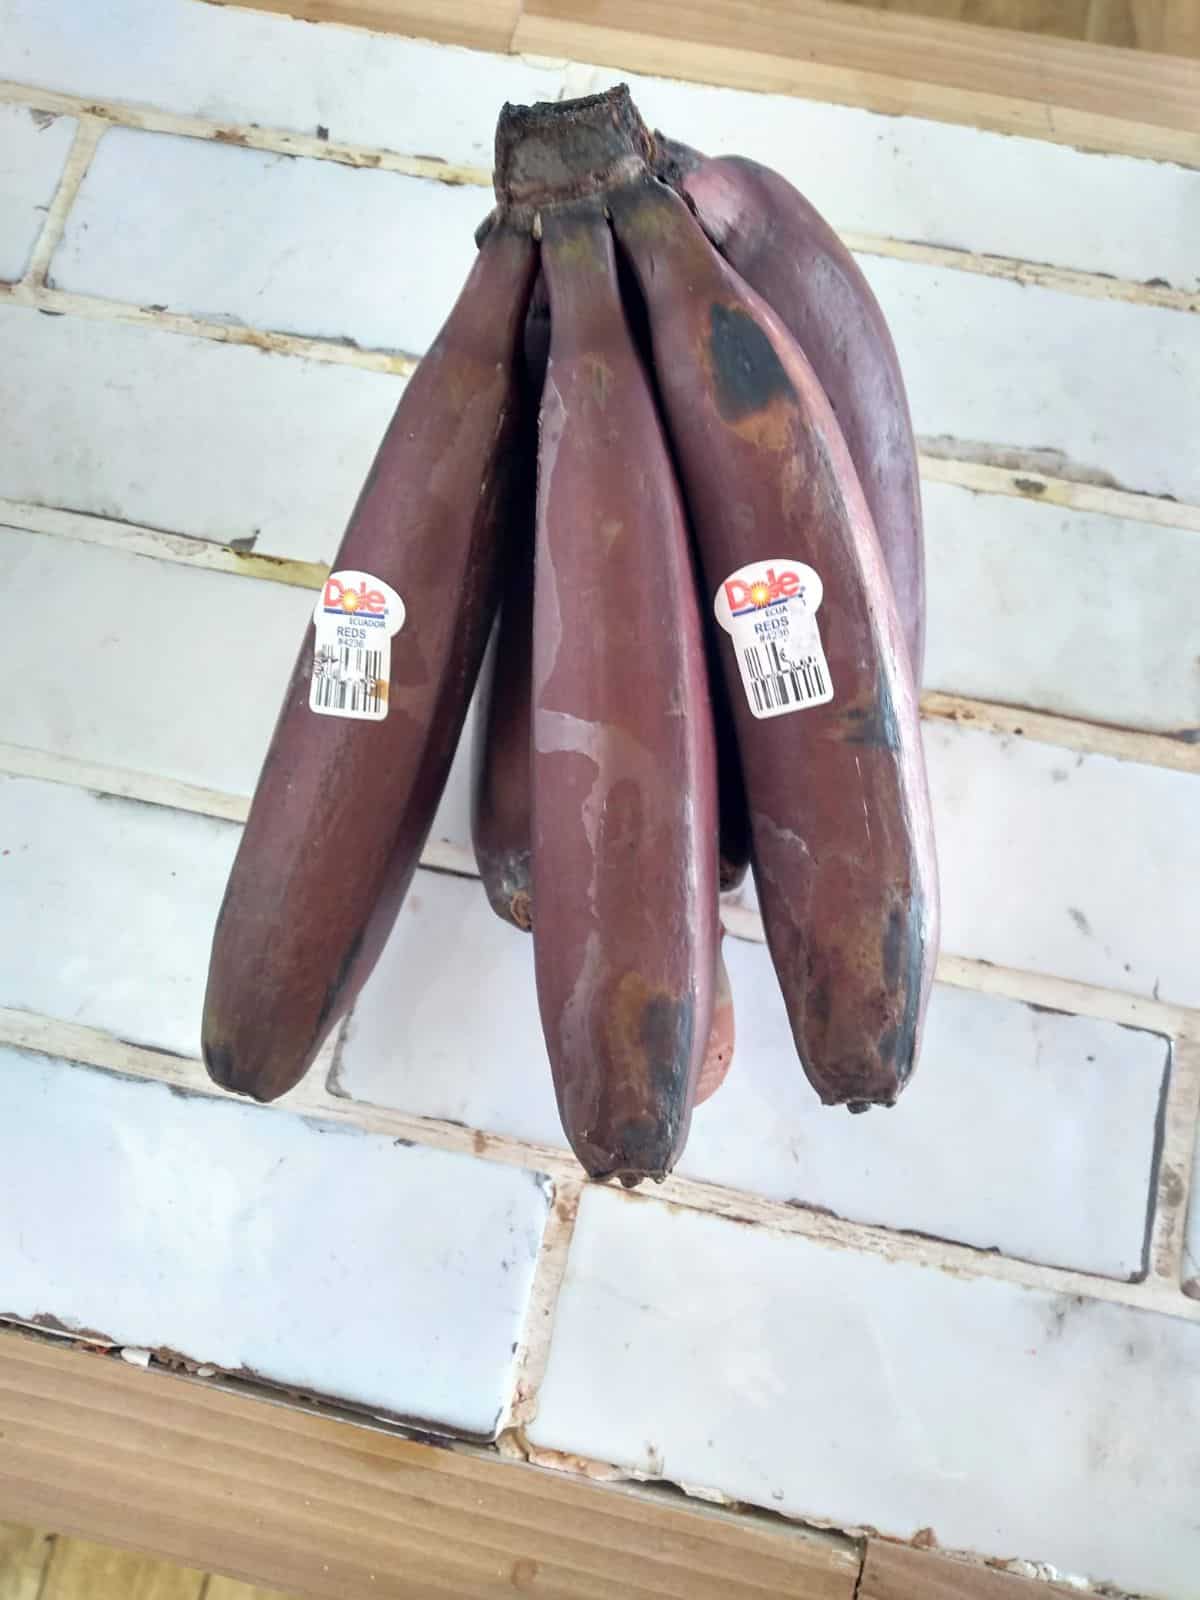 Red bananas sitting on a white tile counter top.